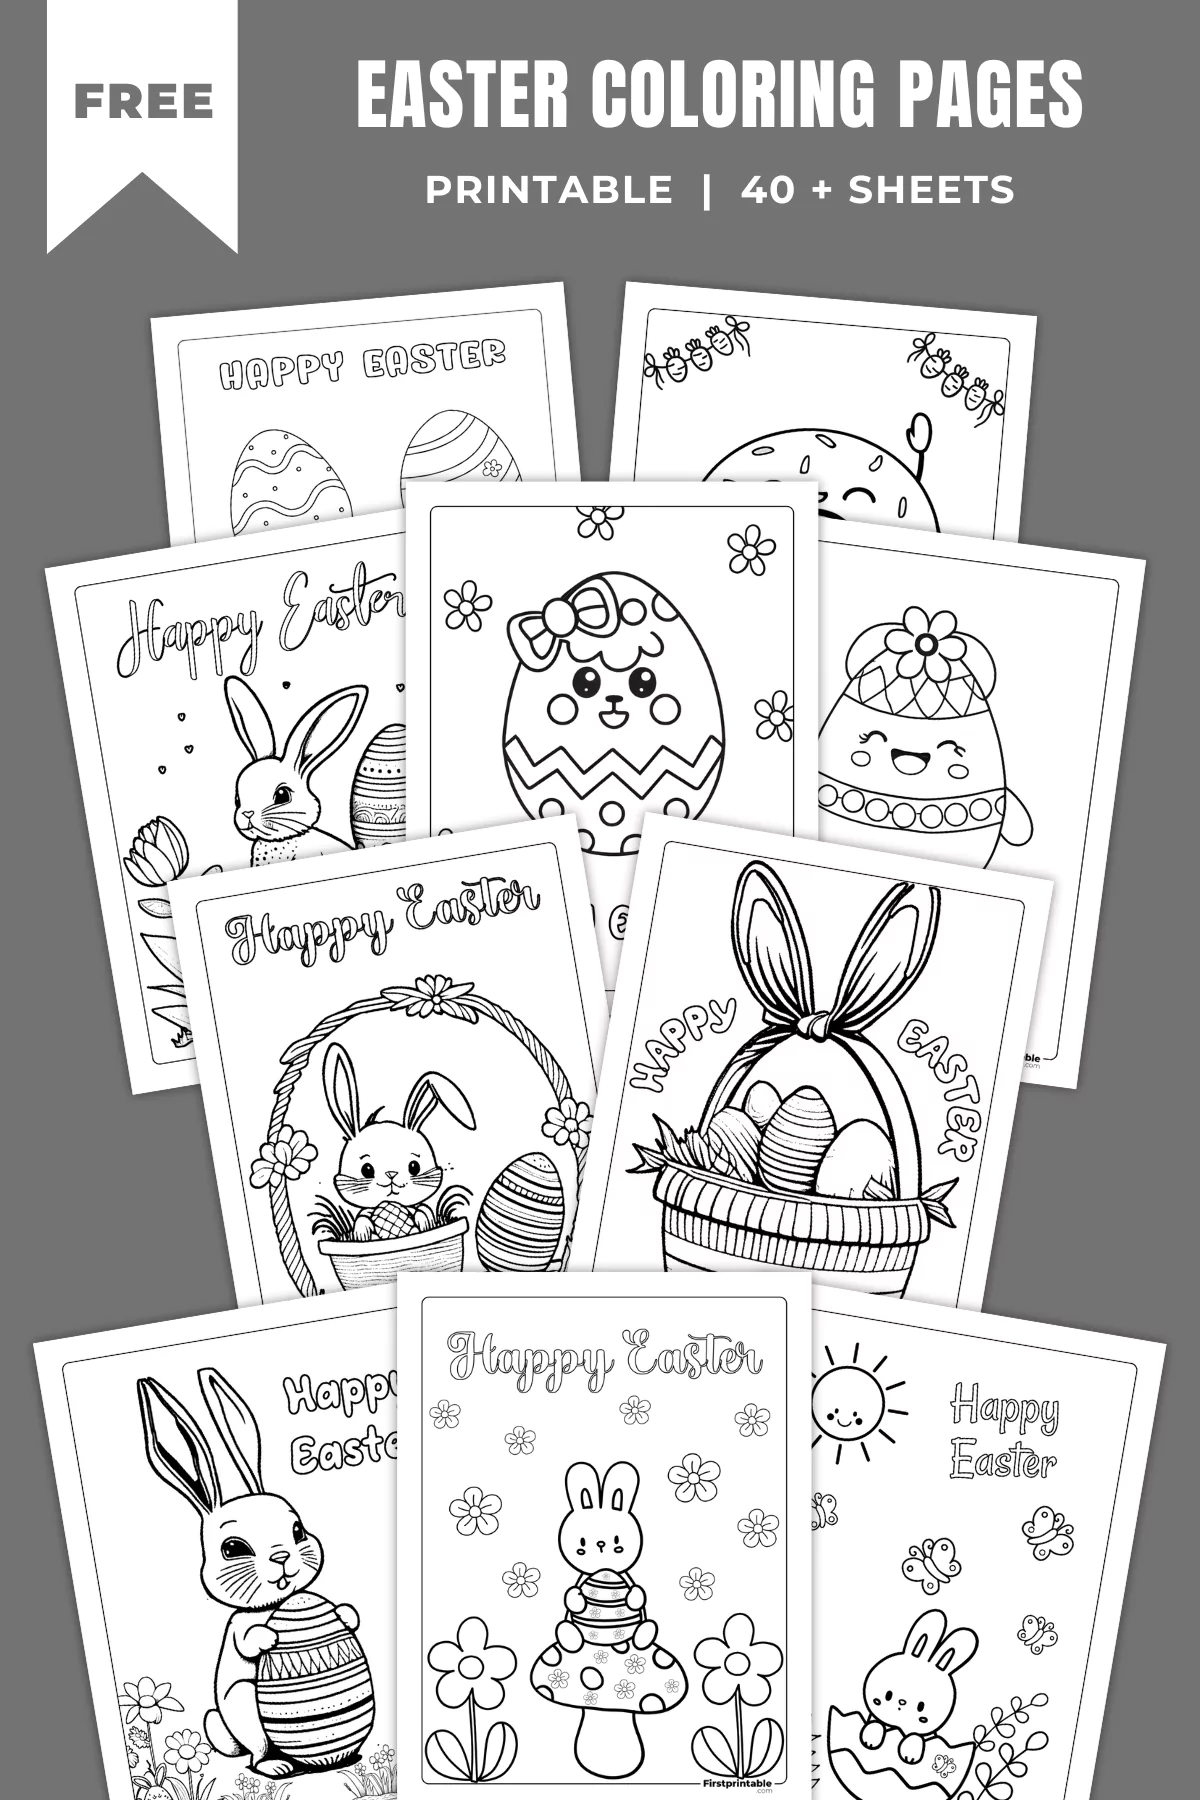 Click here for Easter Coloring Pages